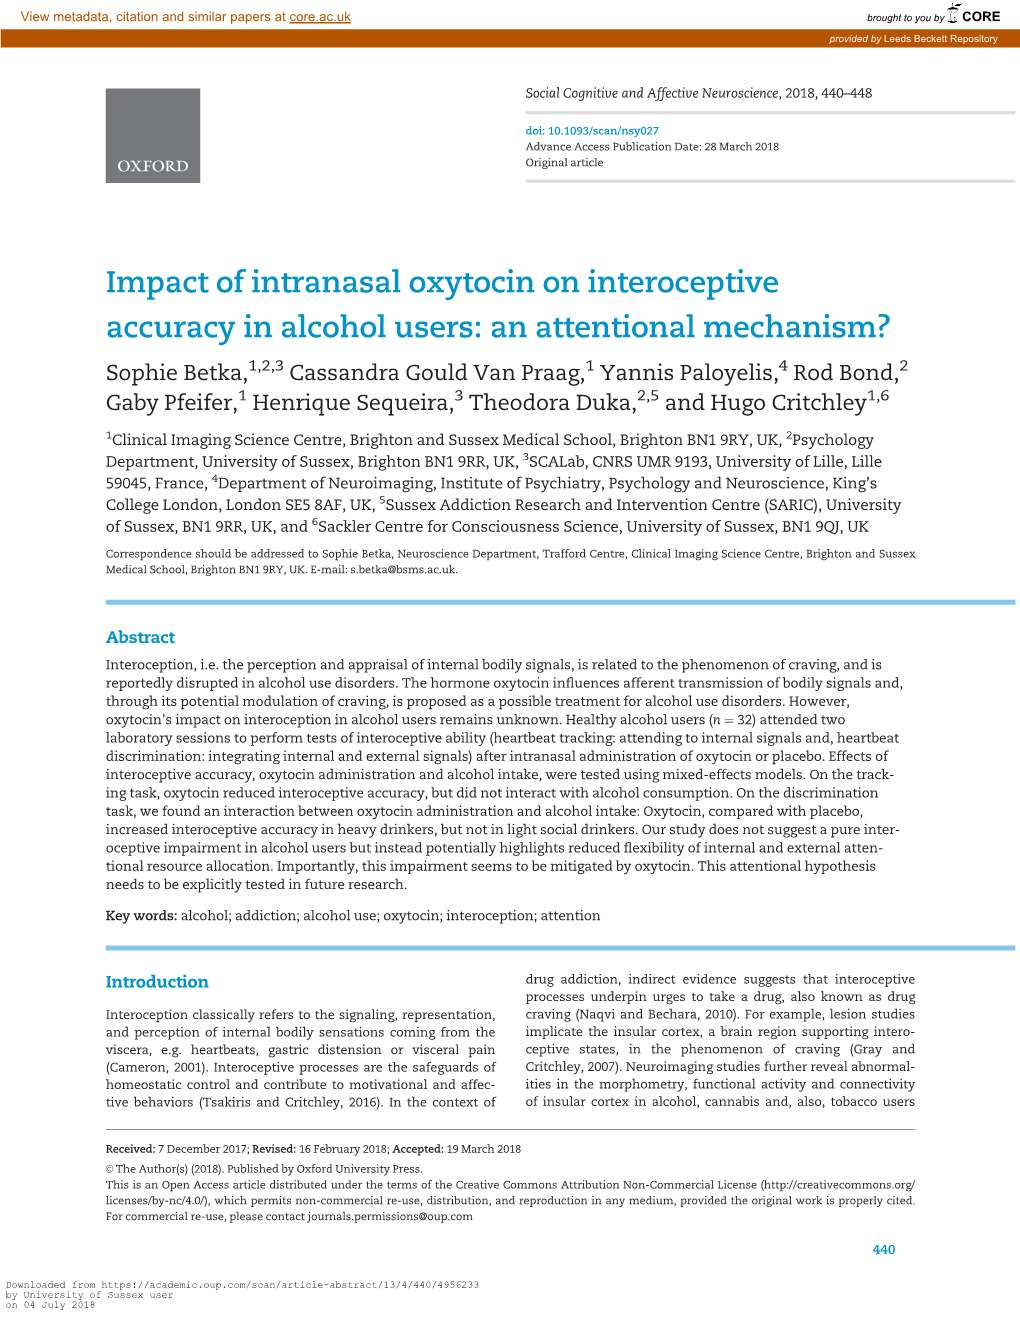 Impact of Intranasal Oxytocin on Interoceptive Accuracy in Alcohol Users